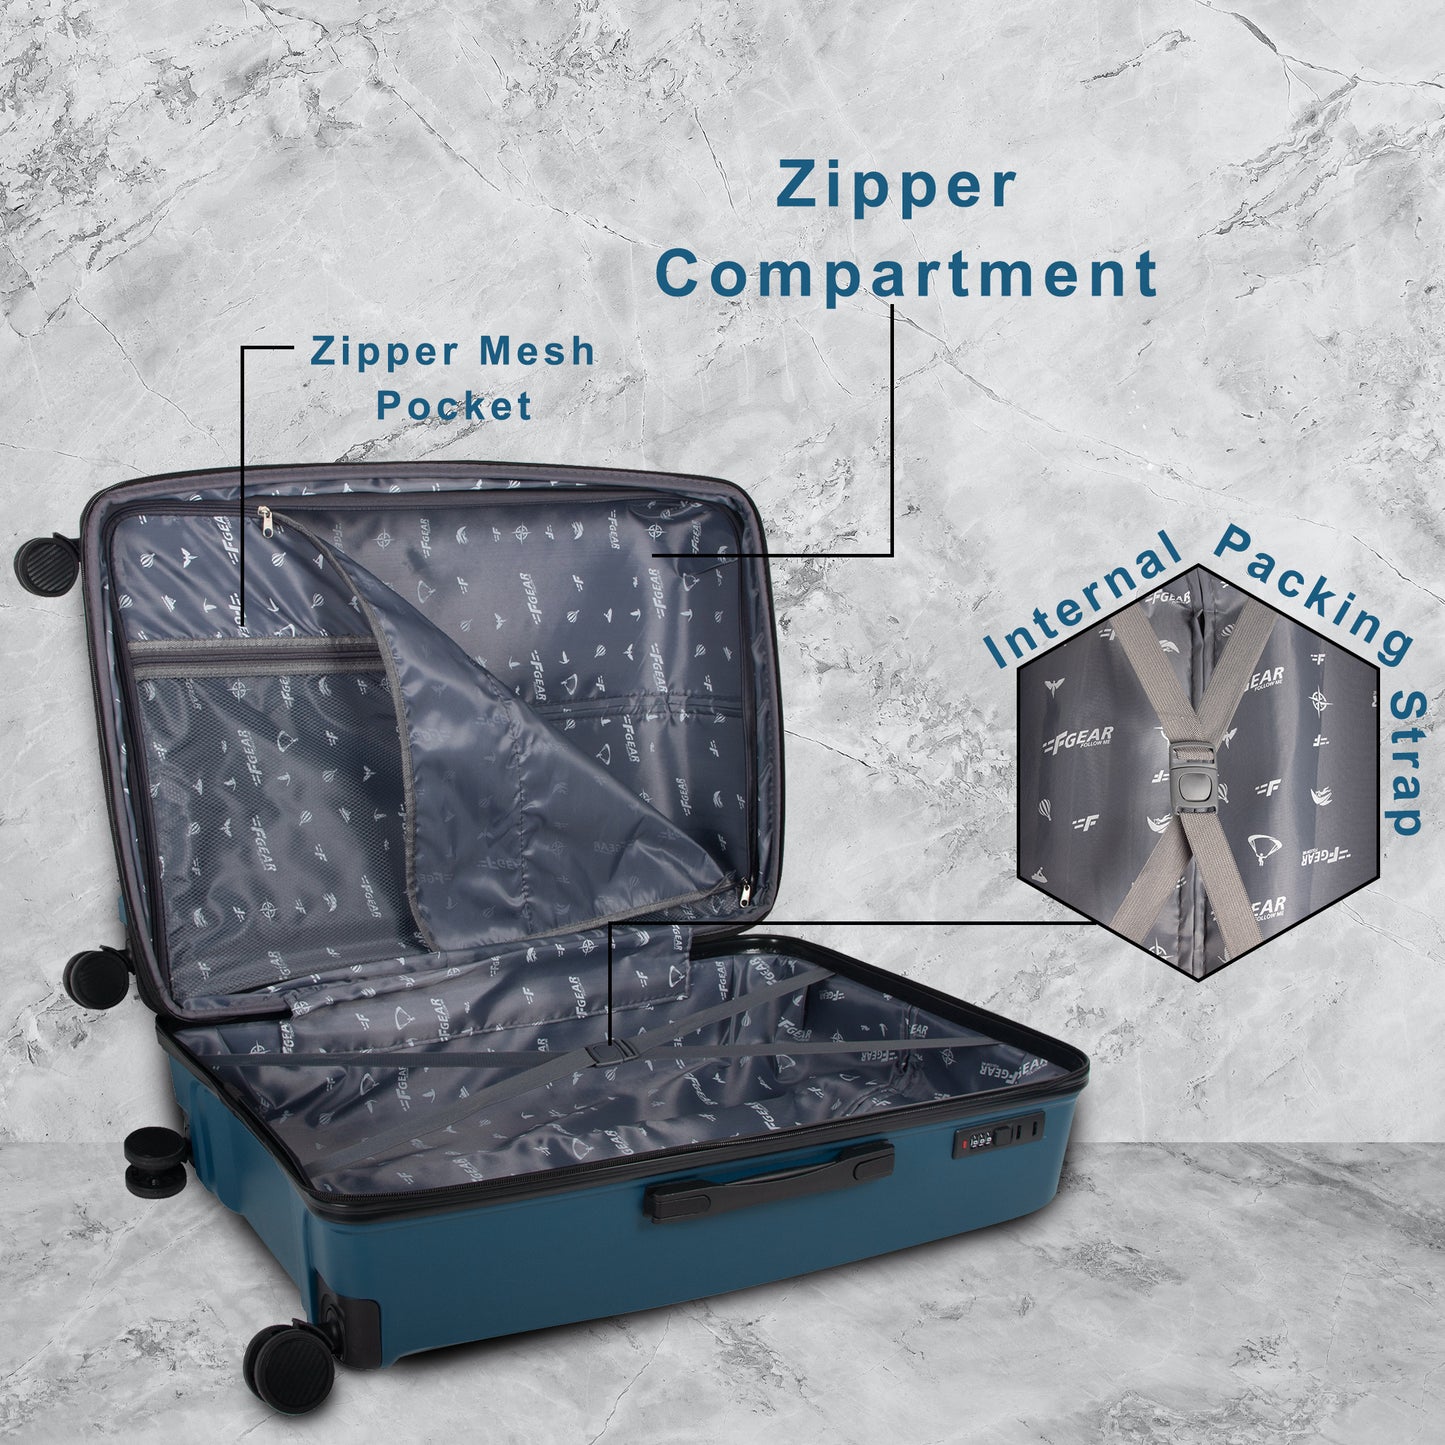 STV PP03 24" Peacock Blue Expandable Medium Check-in Suitcase